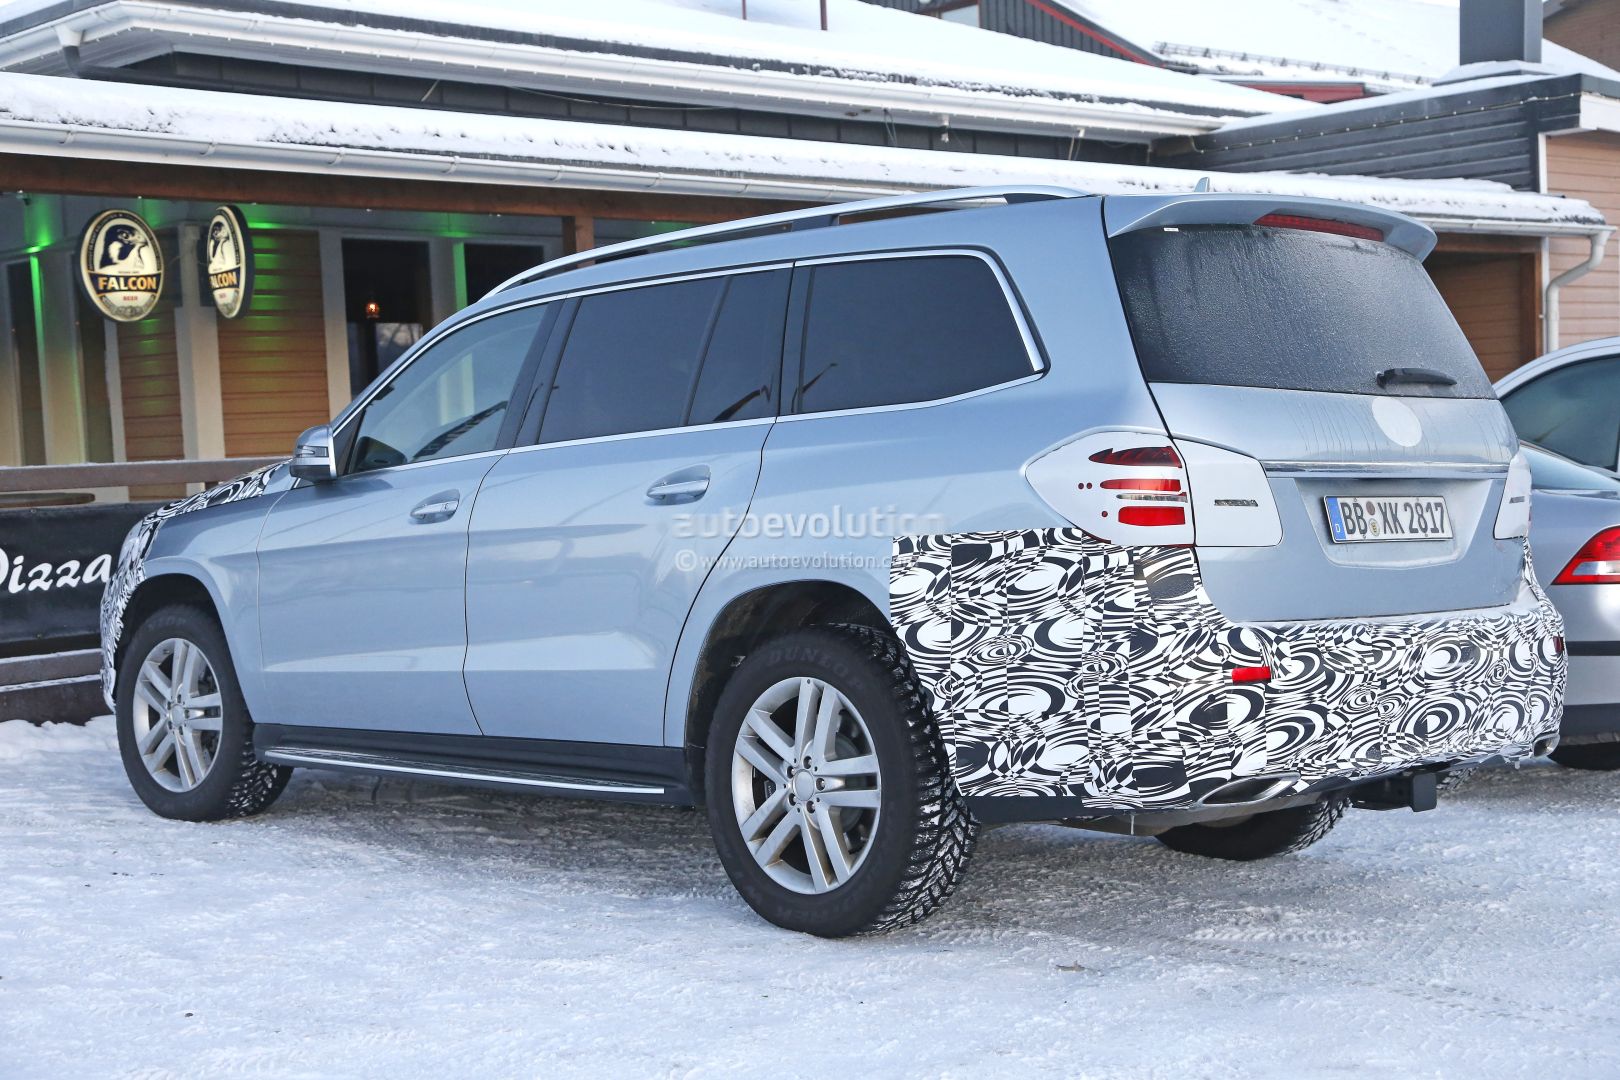 Mercedes Benz Gls Spied Why This Gl Facelift Should Have An